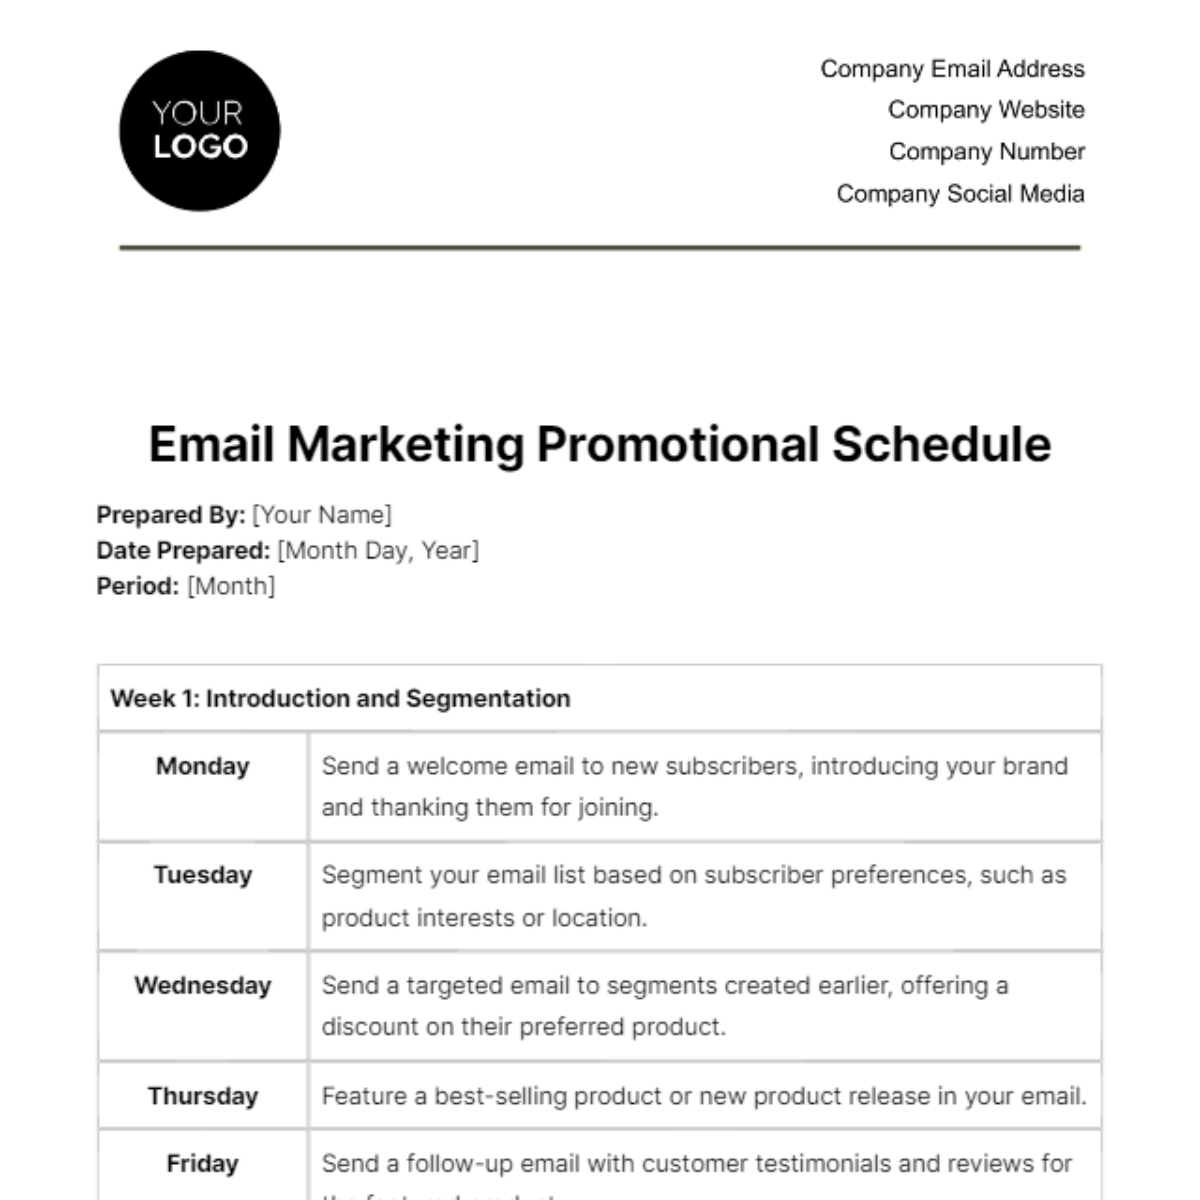 Email Marketing Promotional Schedule Template